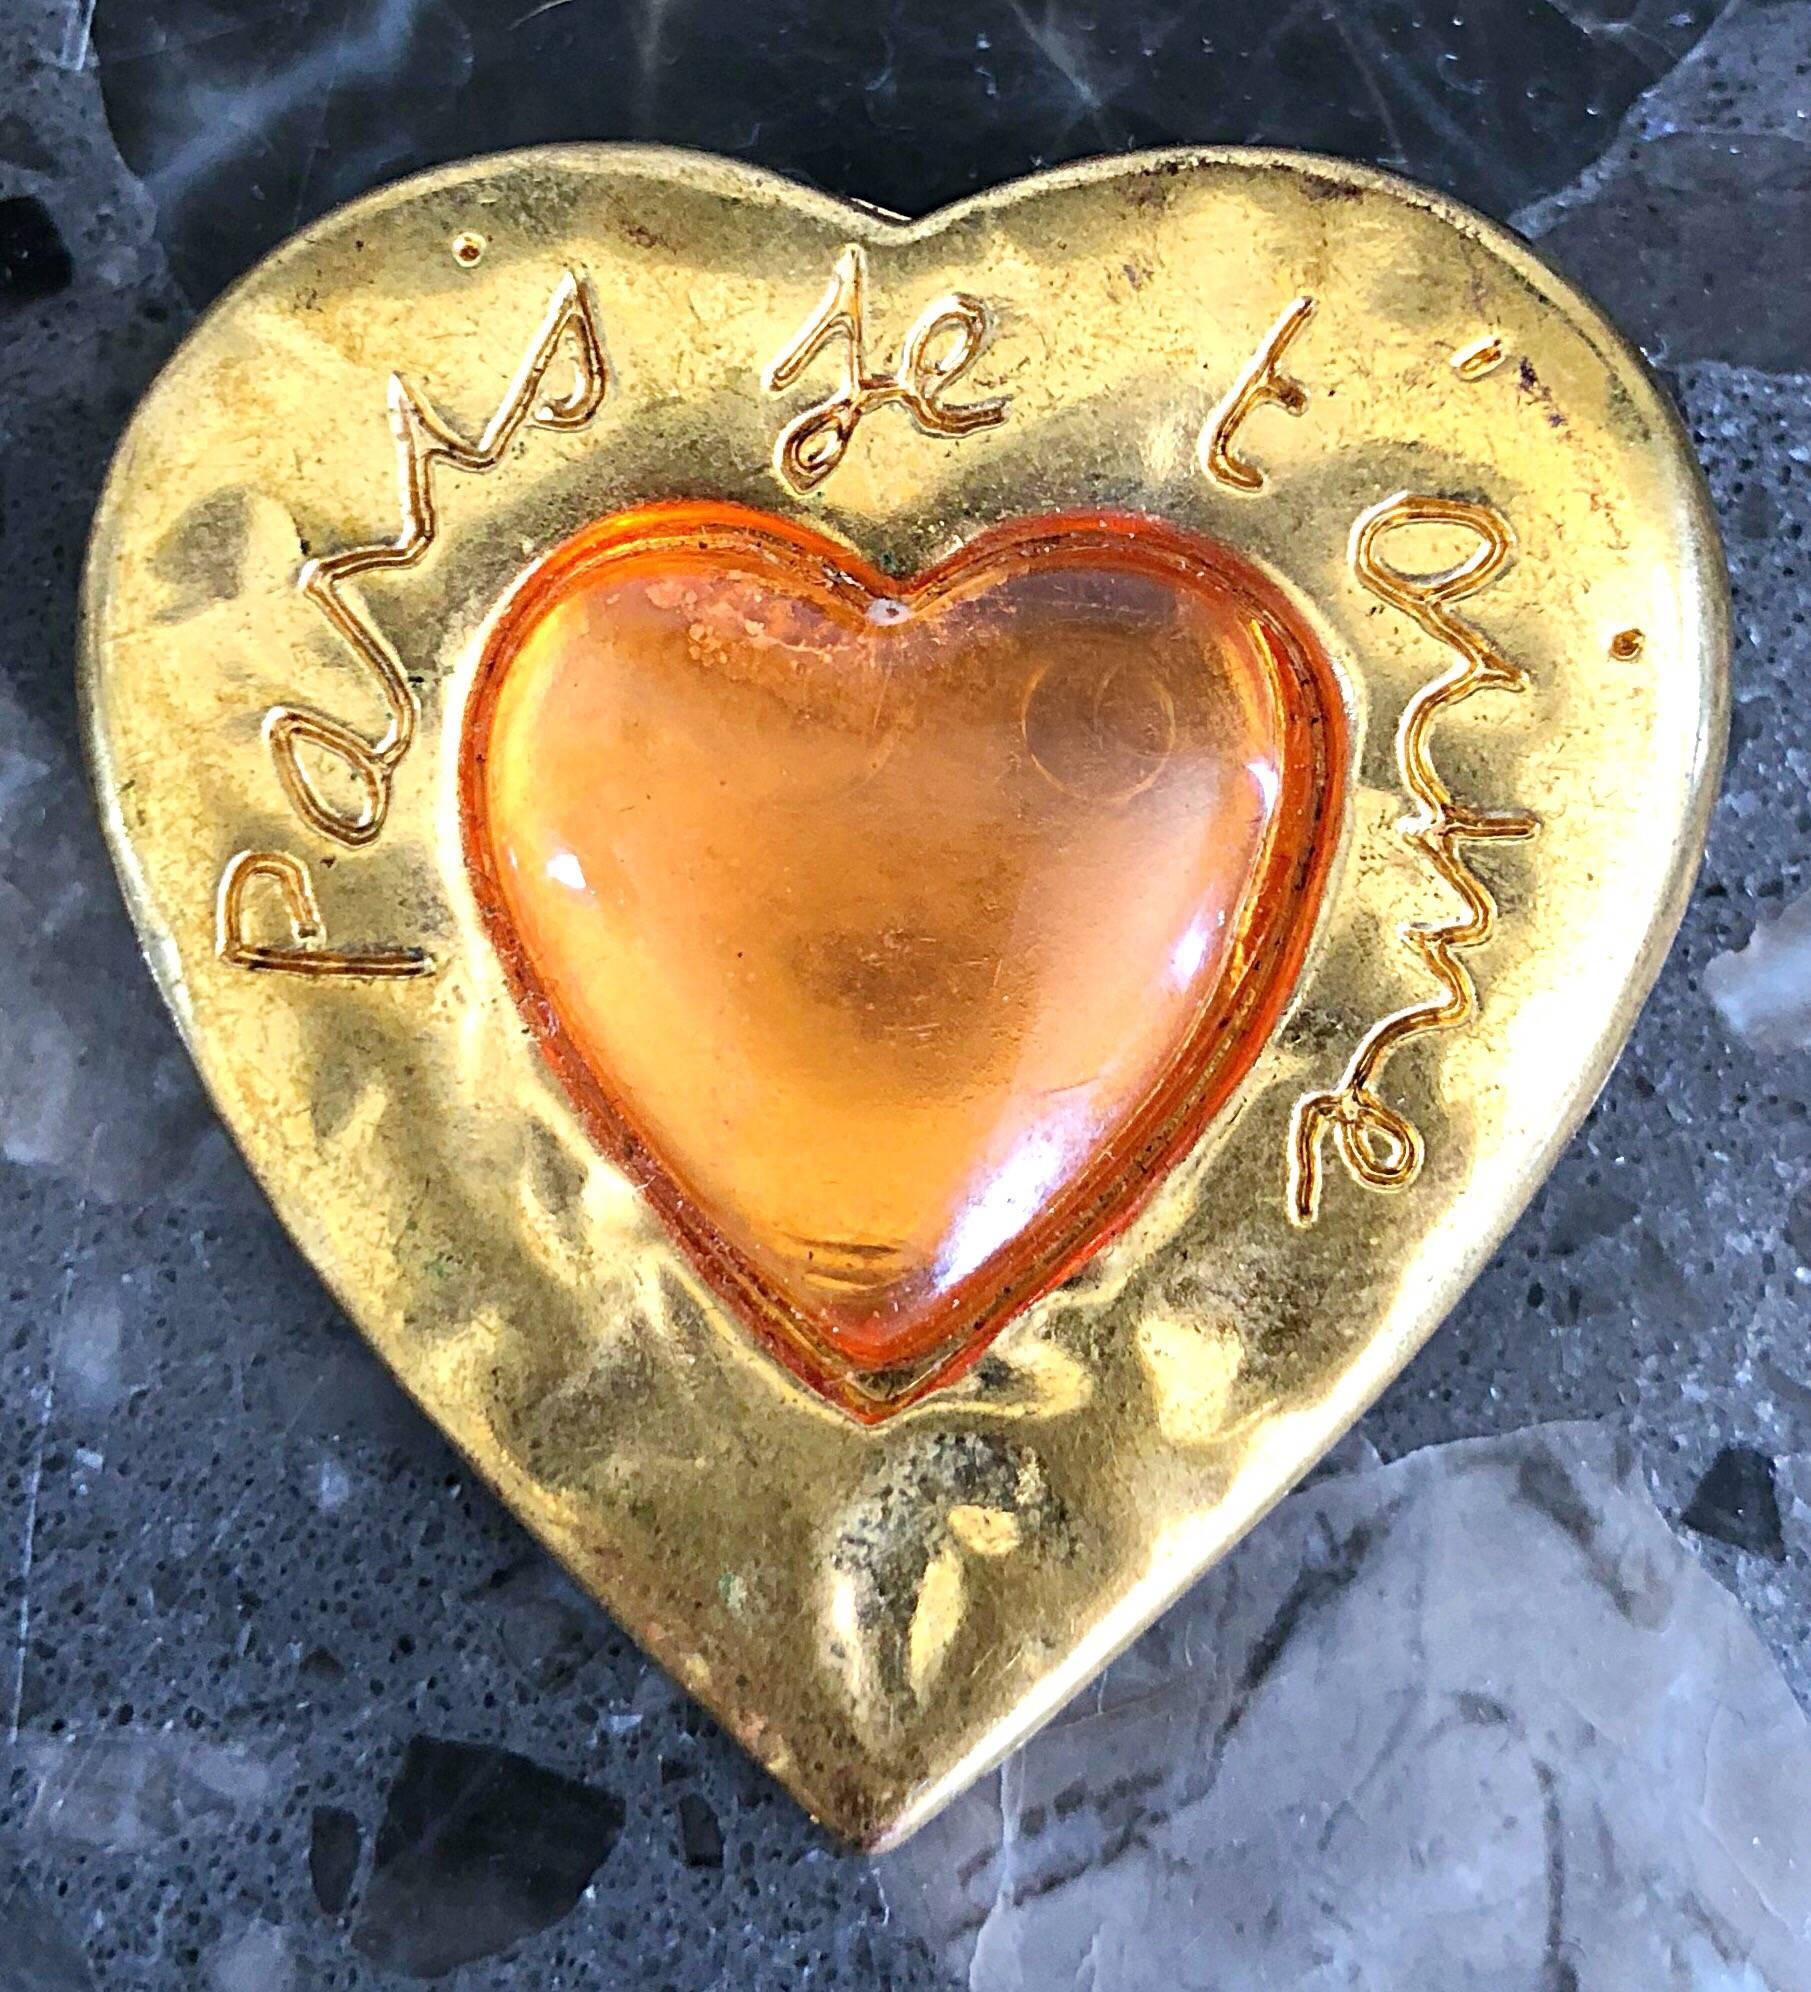 Chic vintage Yves Saint Laurent 'Paris Je T'aime' 
(translates I Love Paris) heart shaped hammered gold and amber gripoix brooch pin! Really adds just the right amount of punch to any outfit. A true classic piece of YSL history! In great